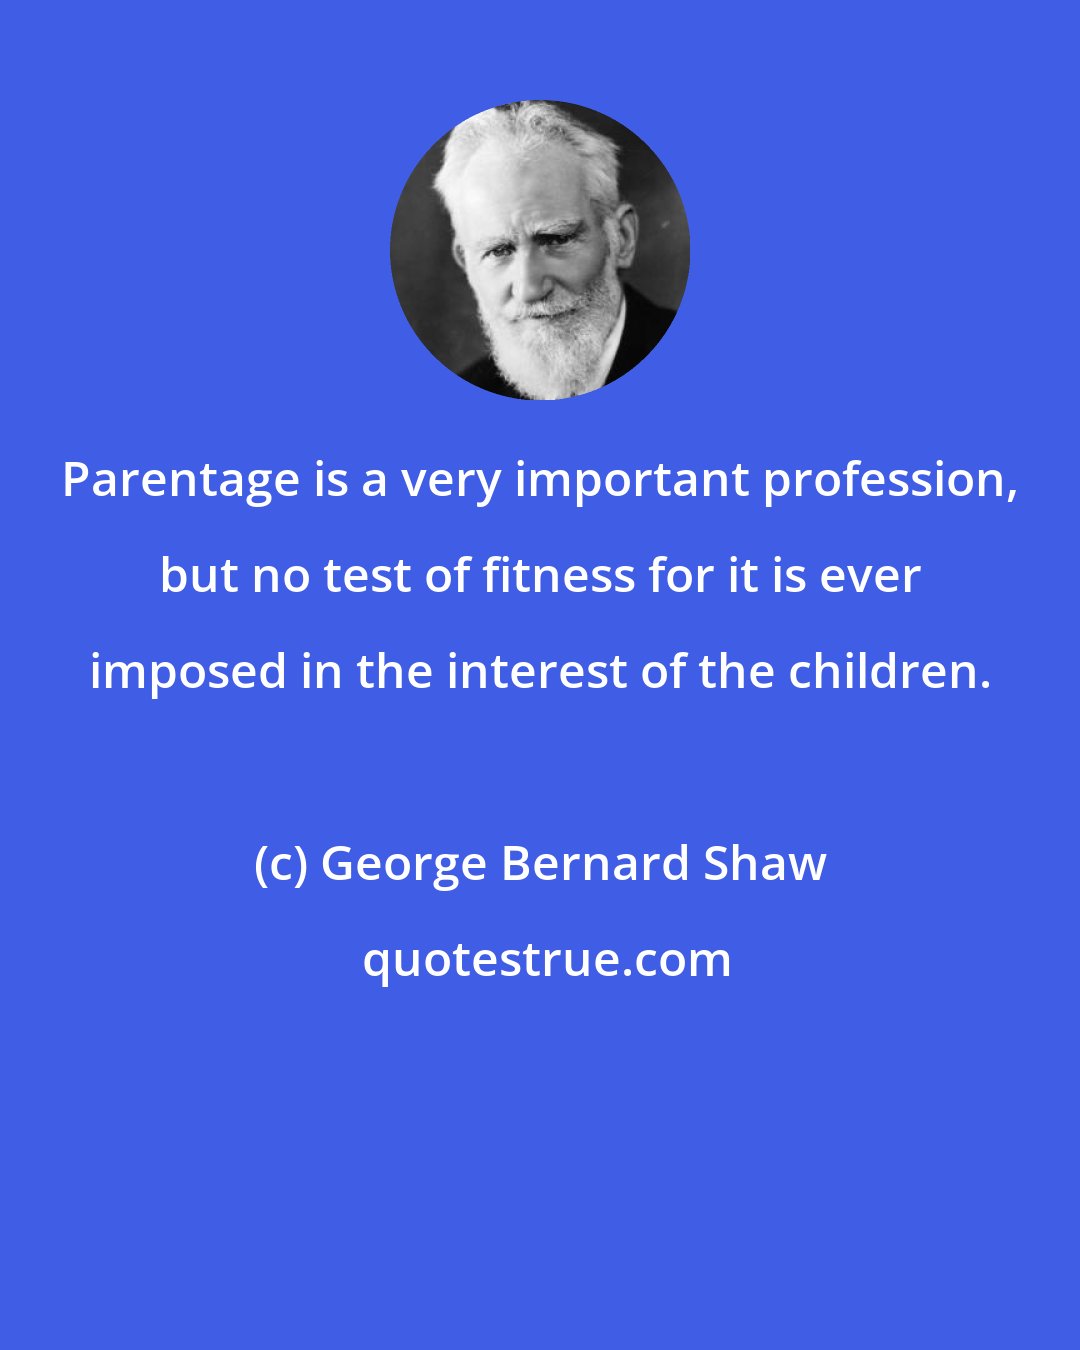 George Bernard Shaw: Parentage is a very important profession, but no test of fitness for it is ever imposed in the interest of the children.